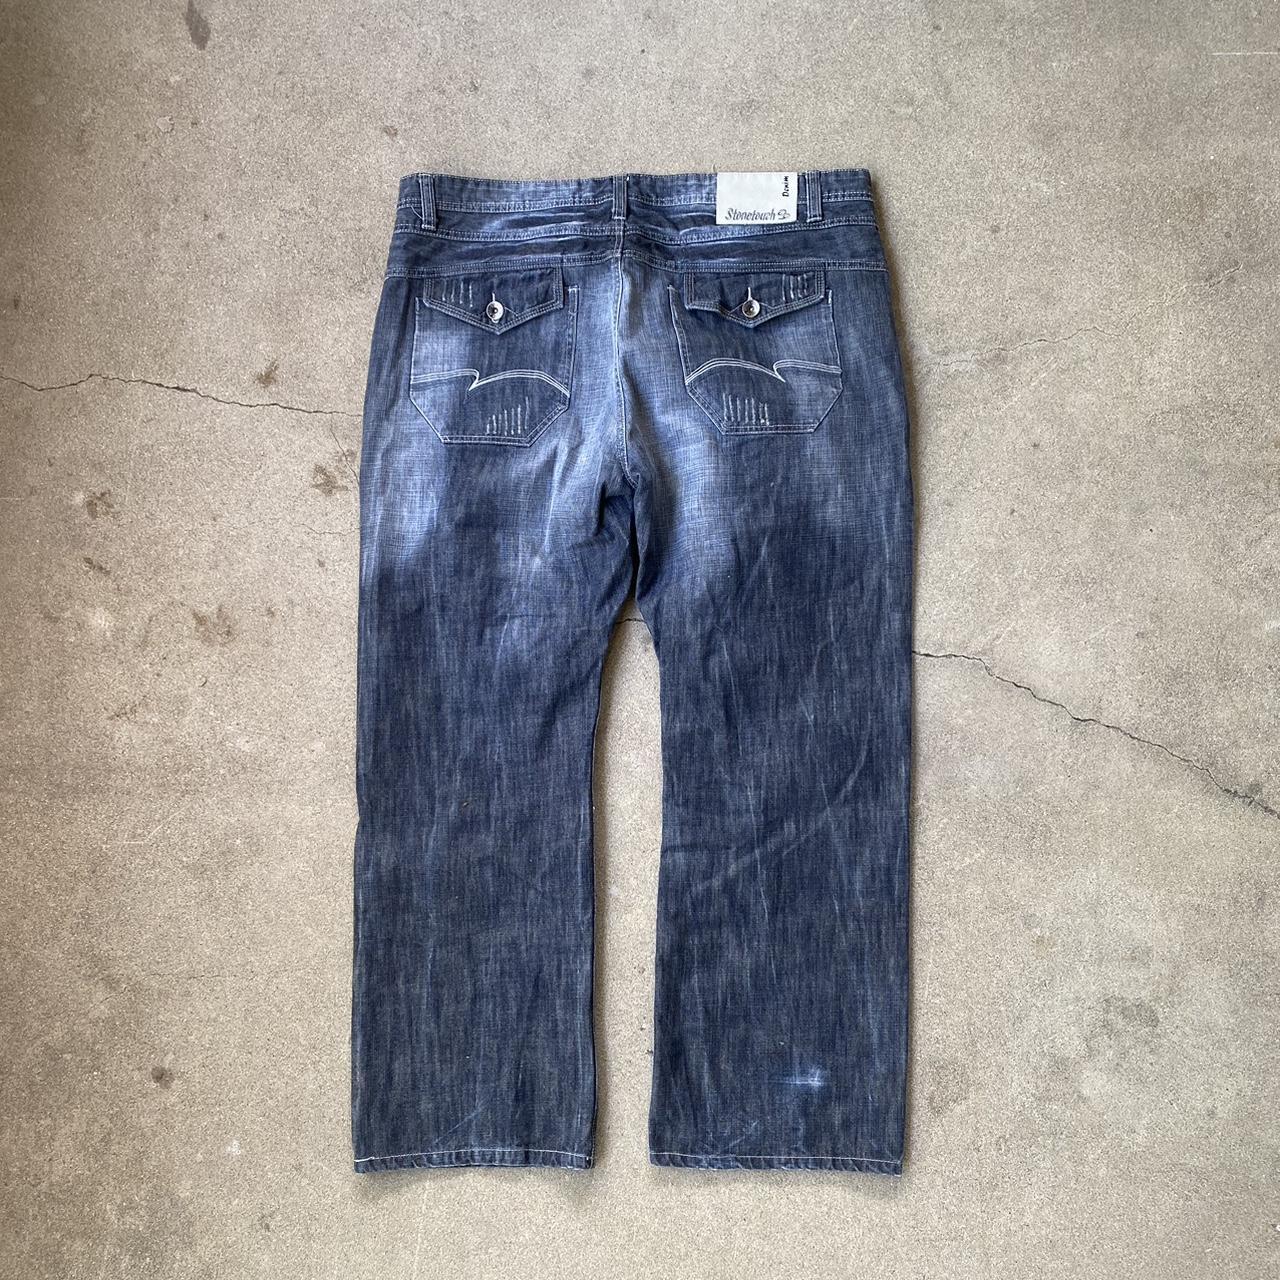 Southpole Men's Blue and Silver Jeans | Depop